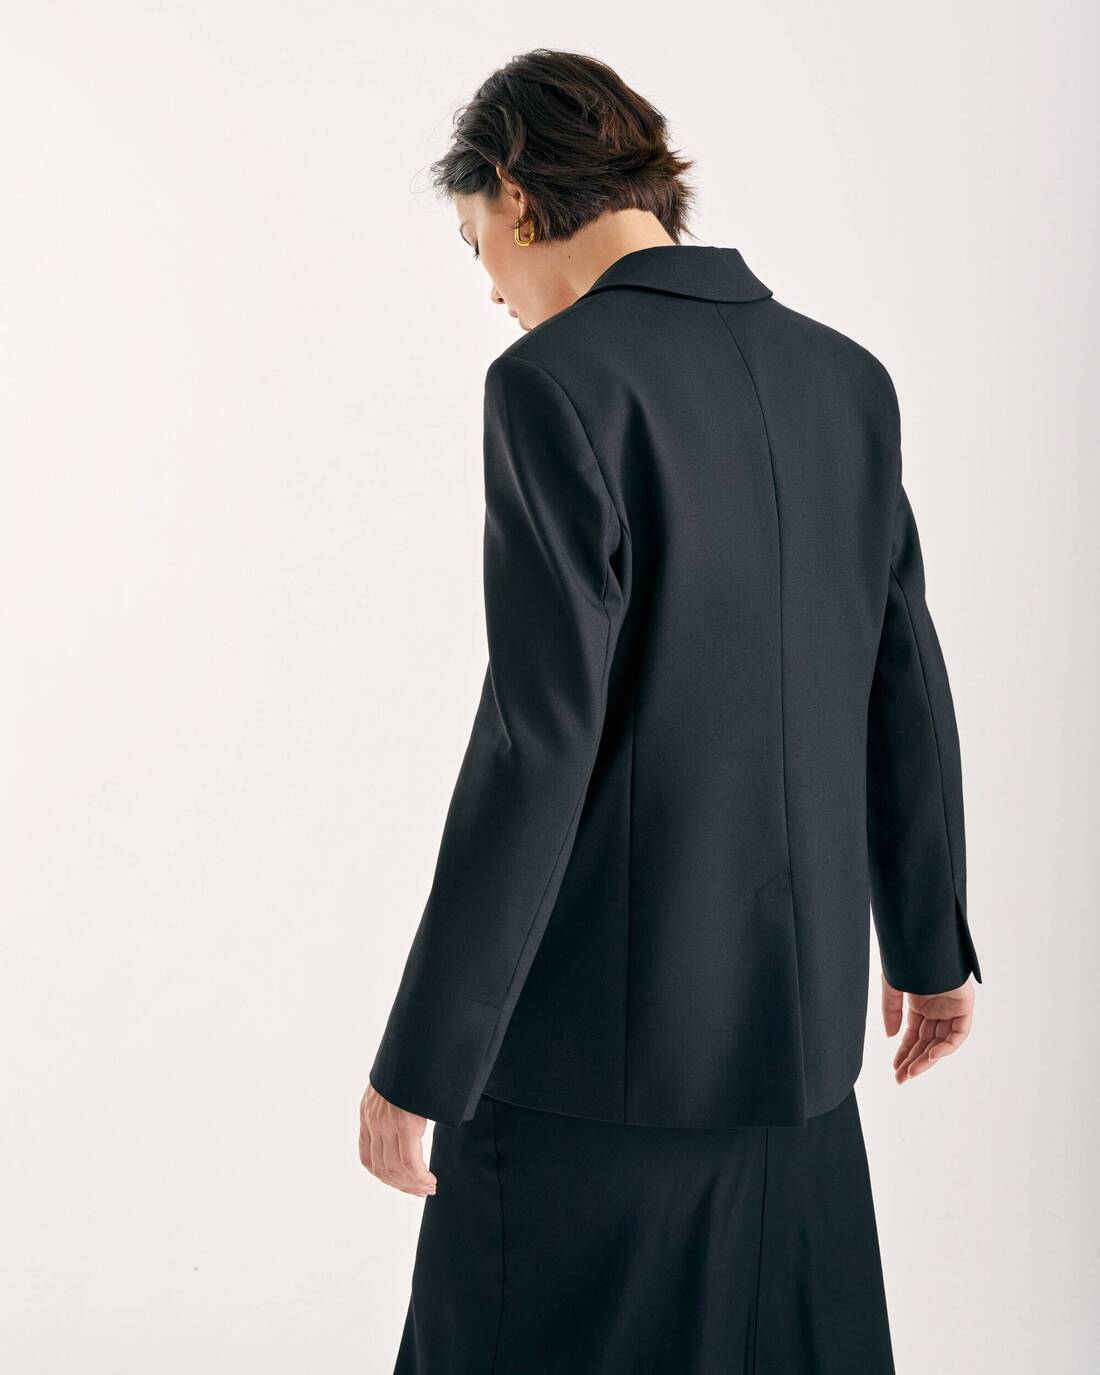 Textured semi-fitted jacket